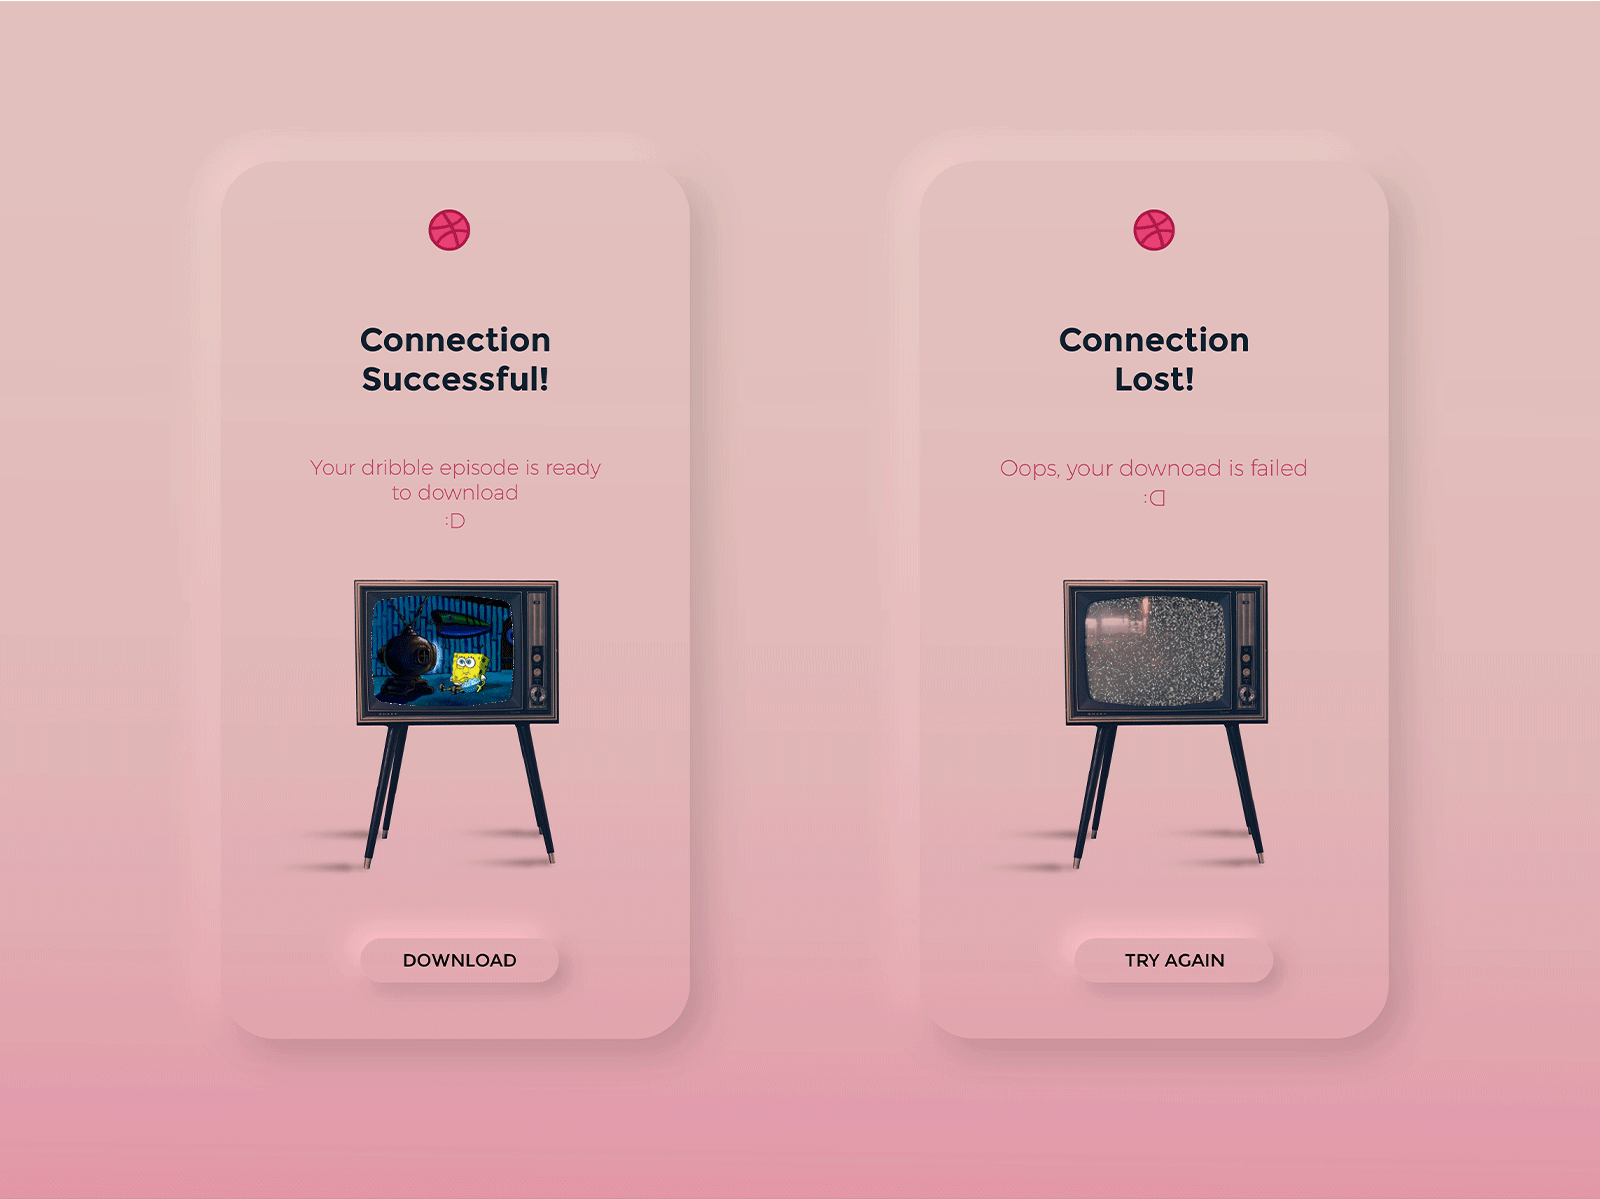 Flash Message for Dribbble Episodes